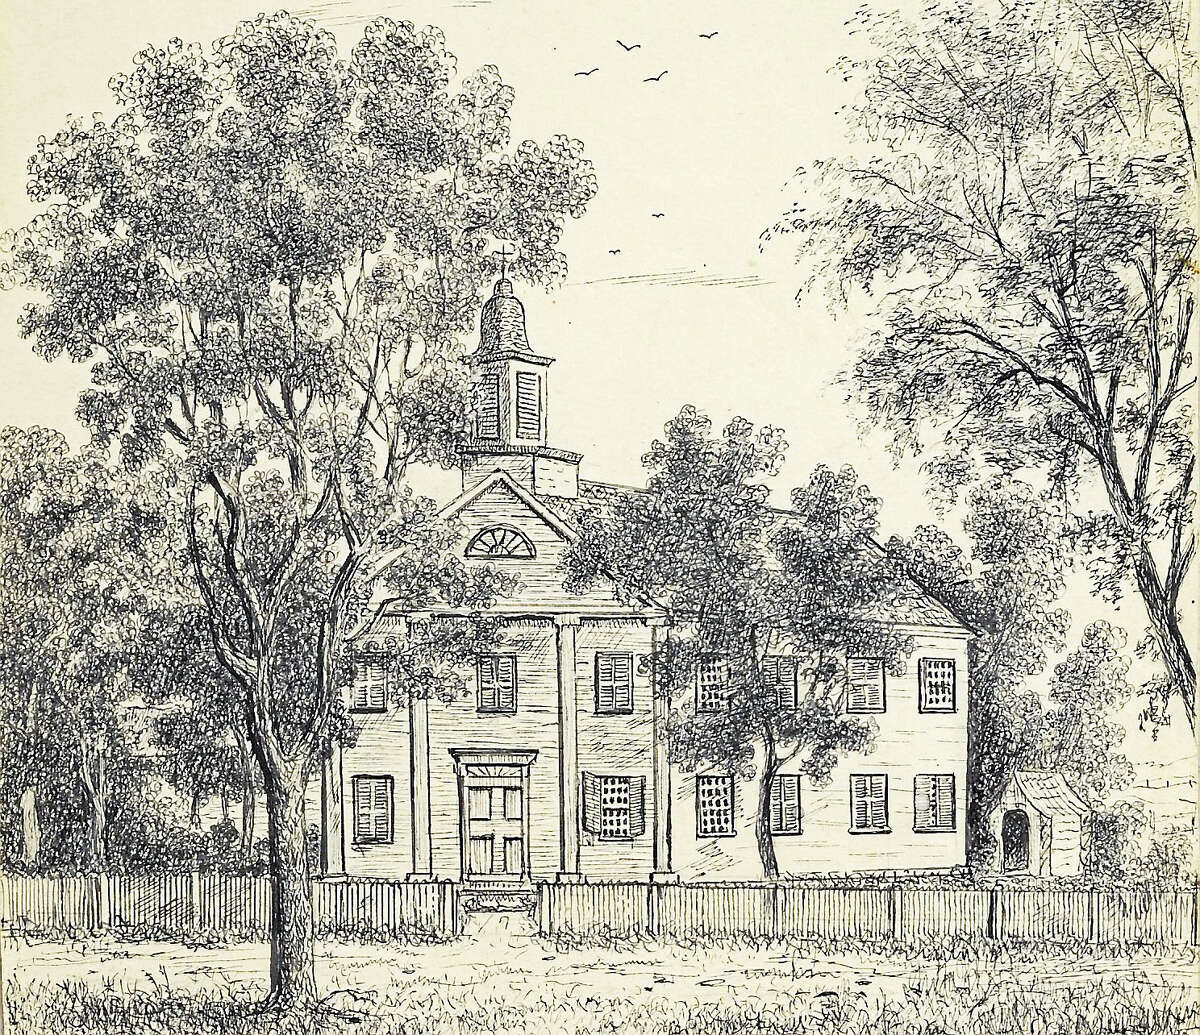 Contributed photoThe Litchfield Female Academy building, a sketch, part of the Litchfield Historical Society collection and included in its new exhibition opening in April.